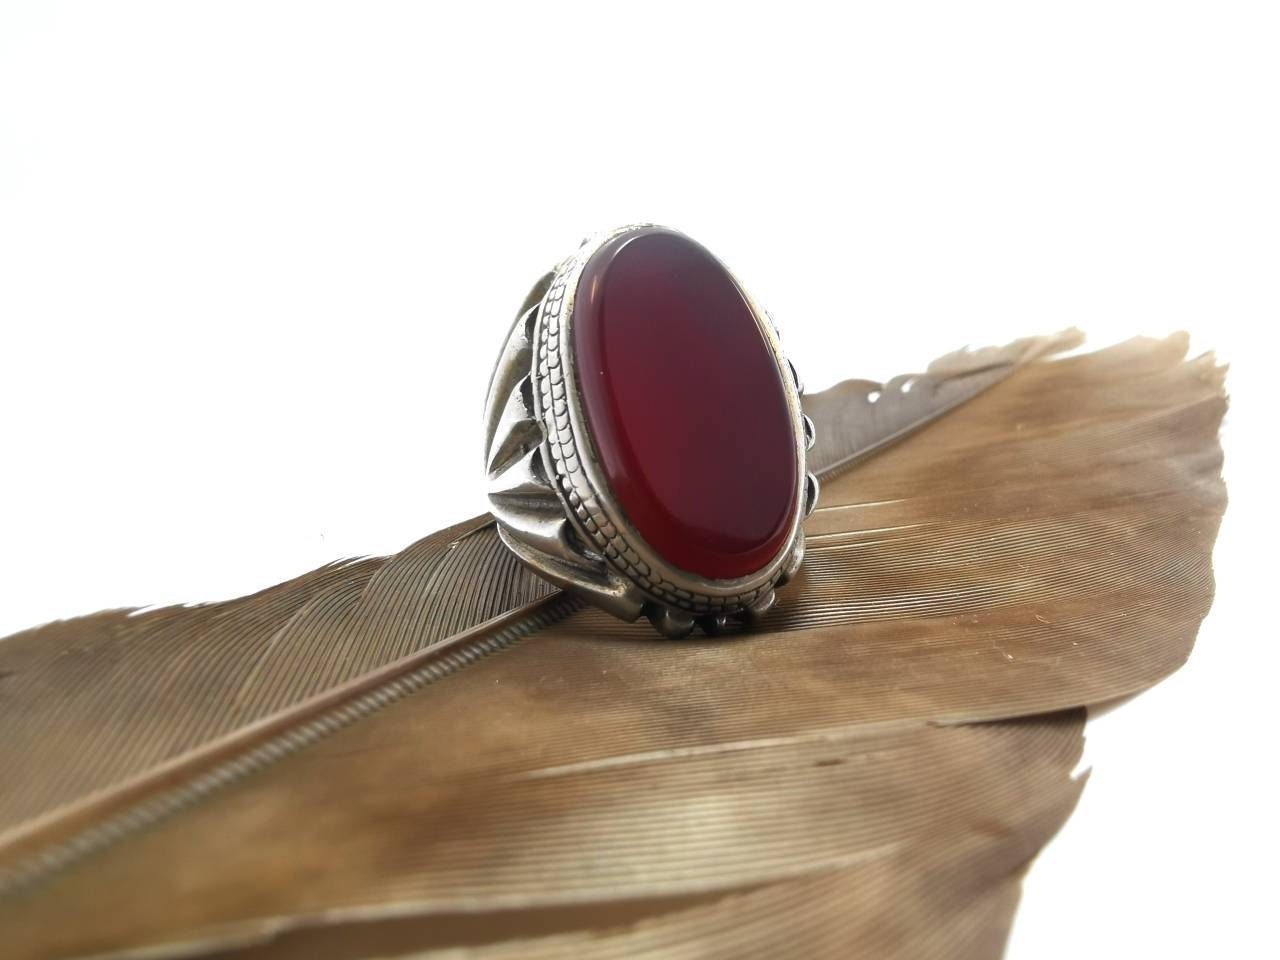 Buy ASTRODIDI Natural Red Sulemani Agate Hakik Stone Ring with Lab  Certificate for Men and Women 7-8 Ratti Adjustable Panchdhatu Laal Hakik  Aqeeq Ring at Amazon.in